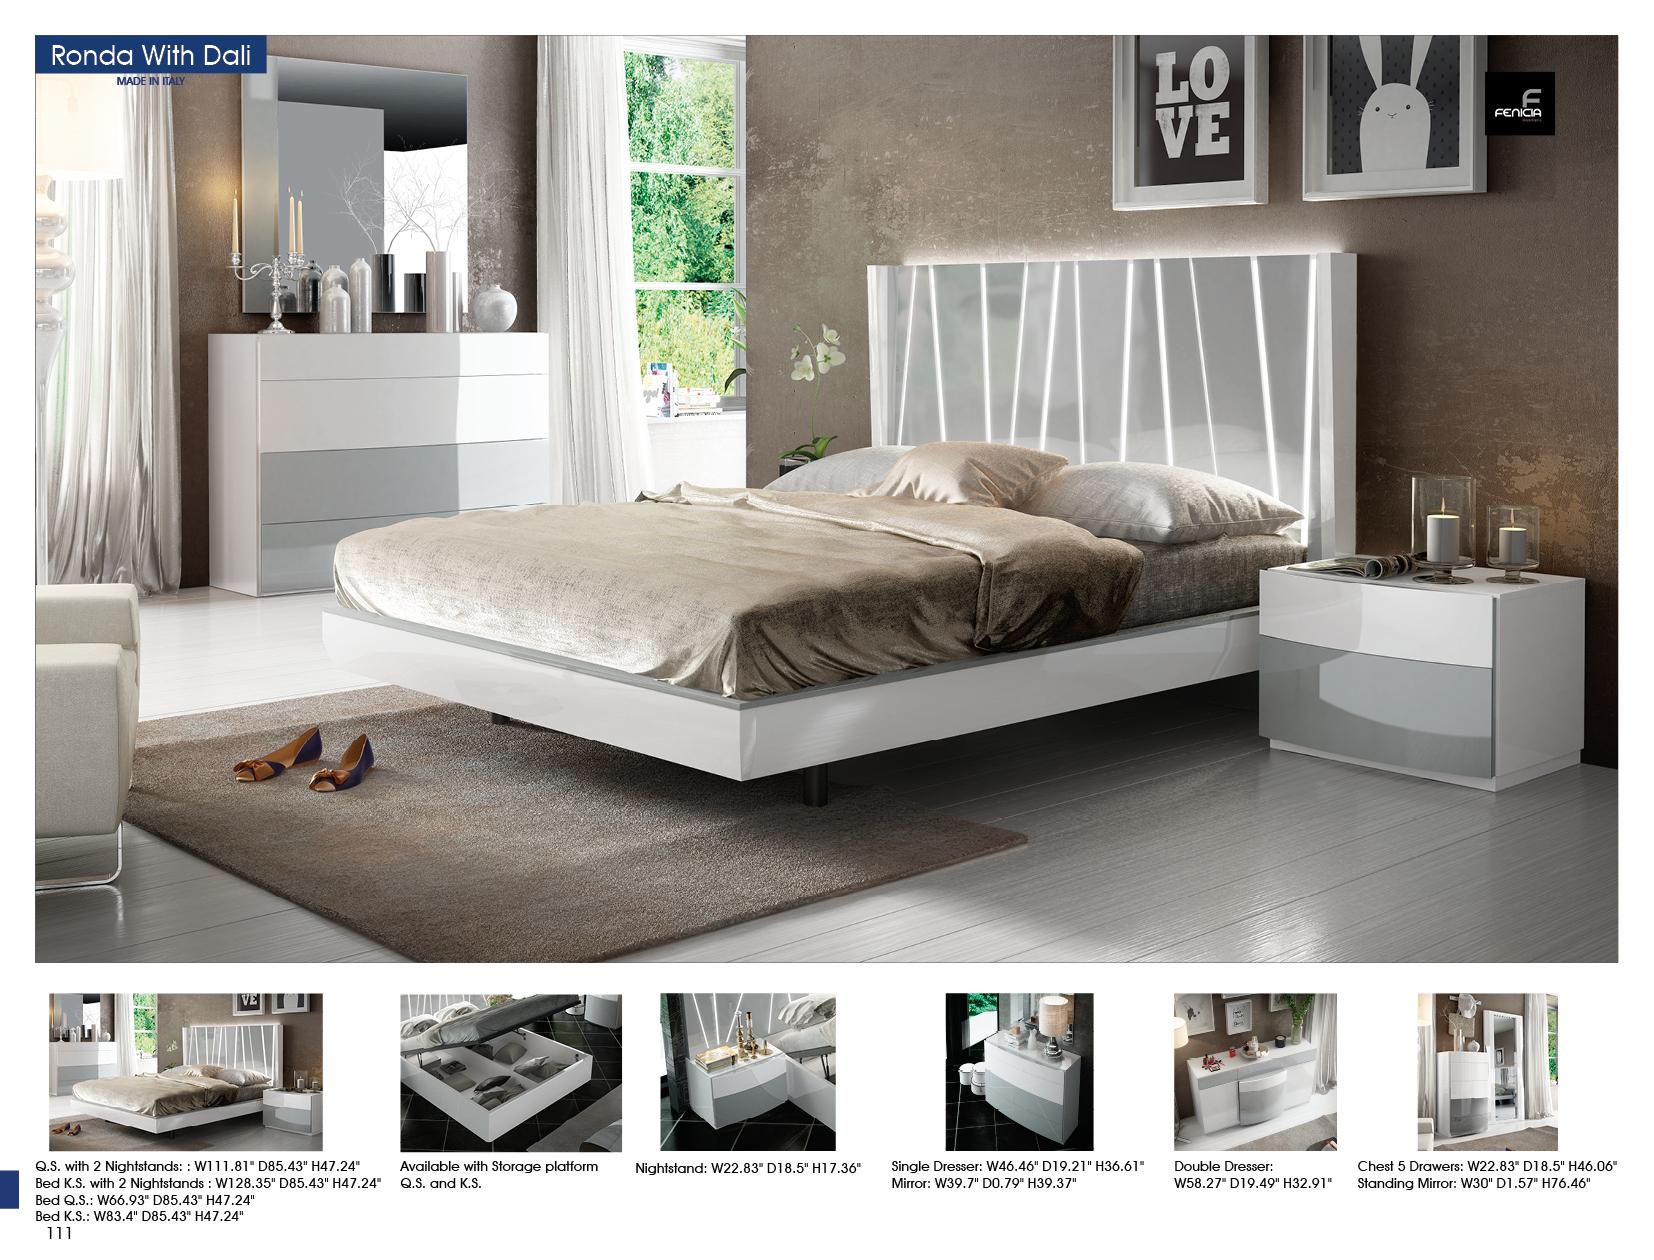 

                    
Buy White & Gray Laquer Finish Queen Bed & 2 Nightstands Spain ESF Ronda DALI
